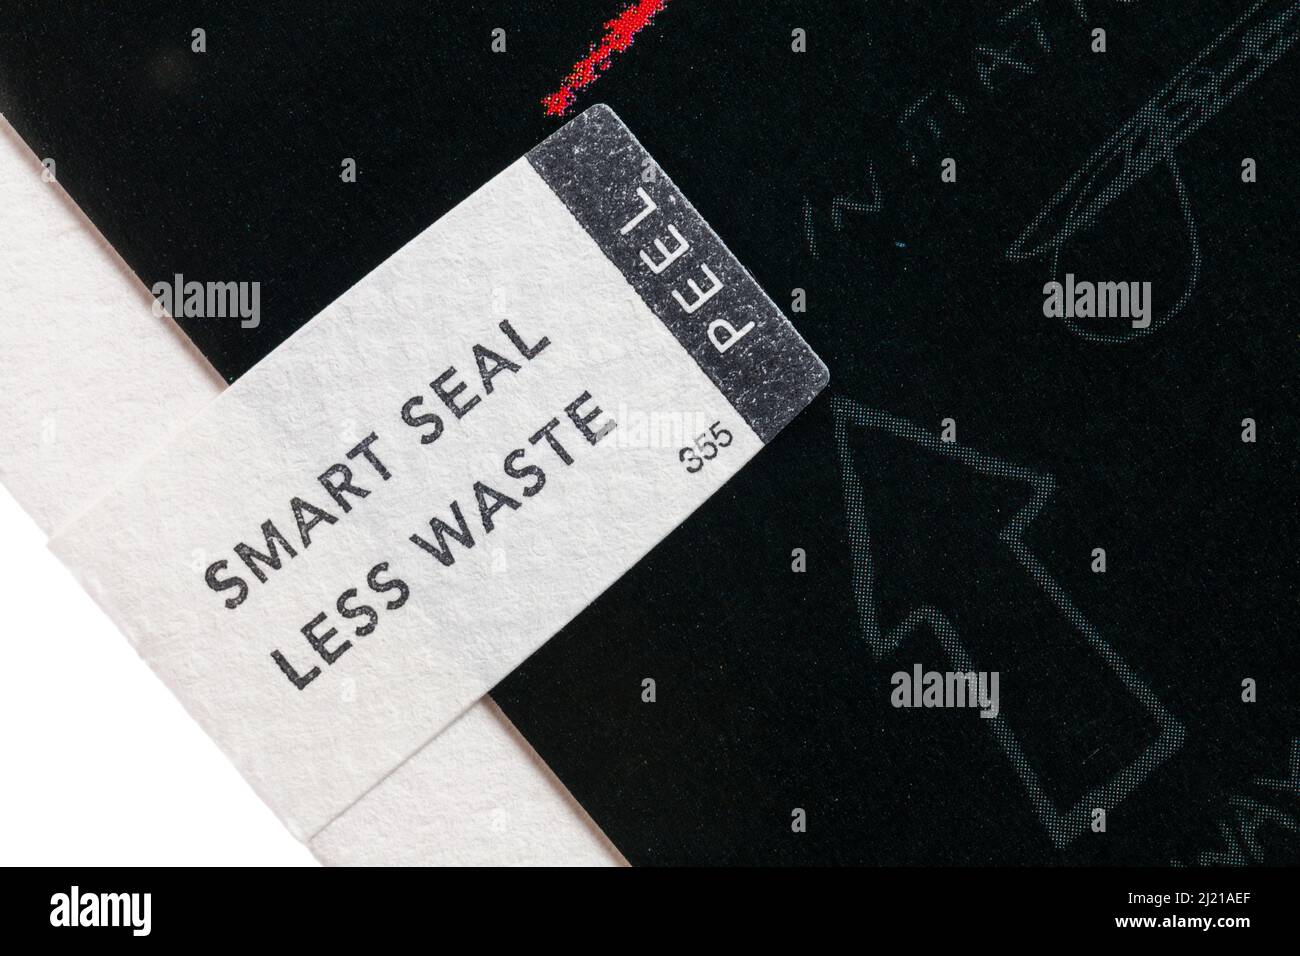 Smart seal less waste peel off label on greetings card to keep card & envelope together reduce waste to avoid additional wrapping help the environment Stock Photo